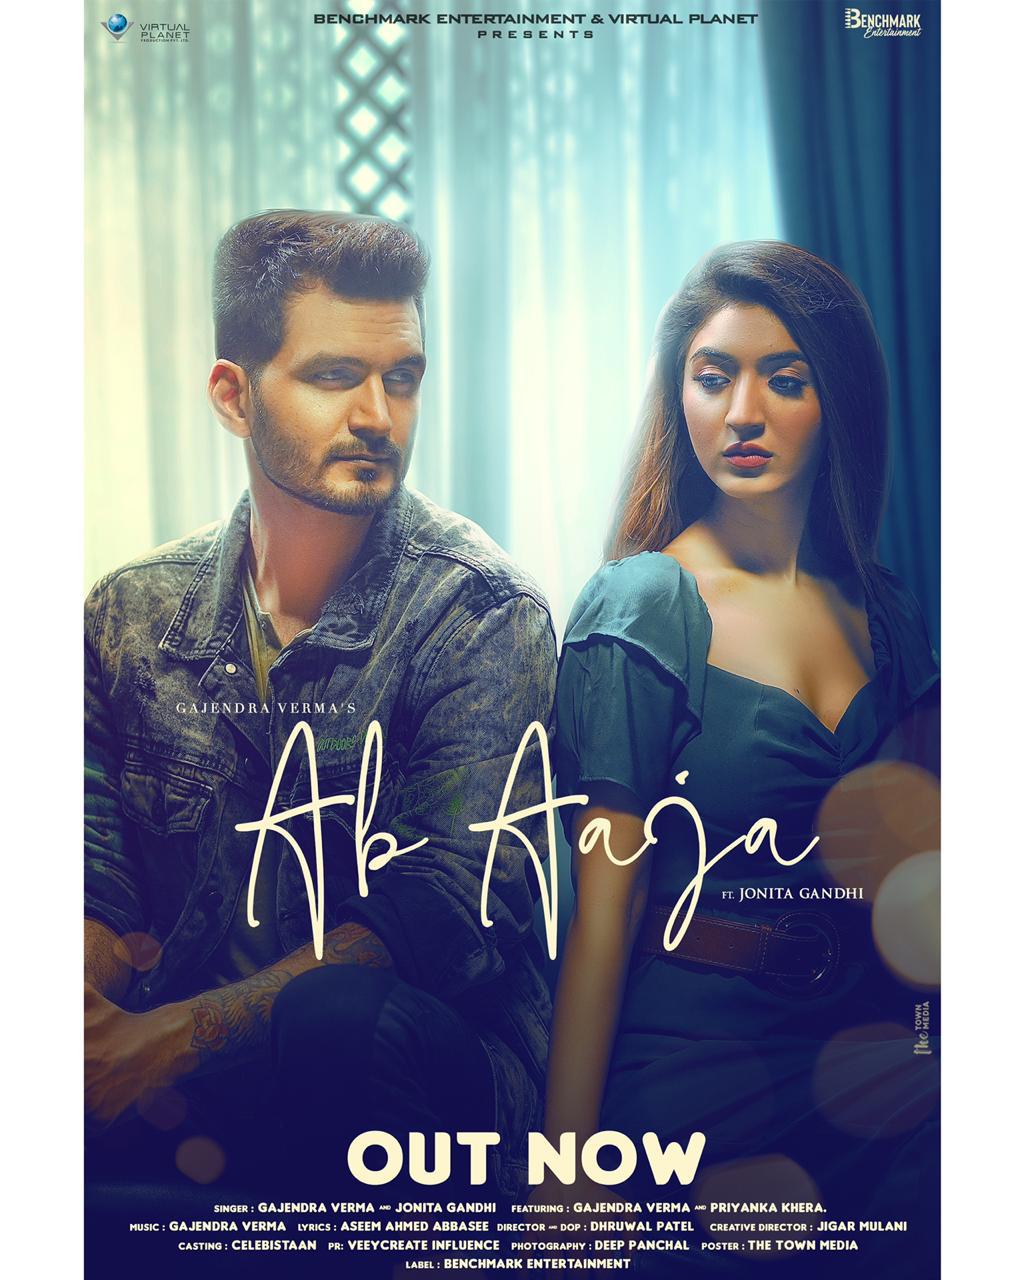 Benchmark Entertainment drops their latest track titled ‘Ab Aaja’ by Gajendra Verma and Jonita Gandhi